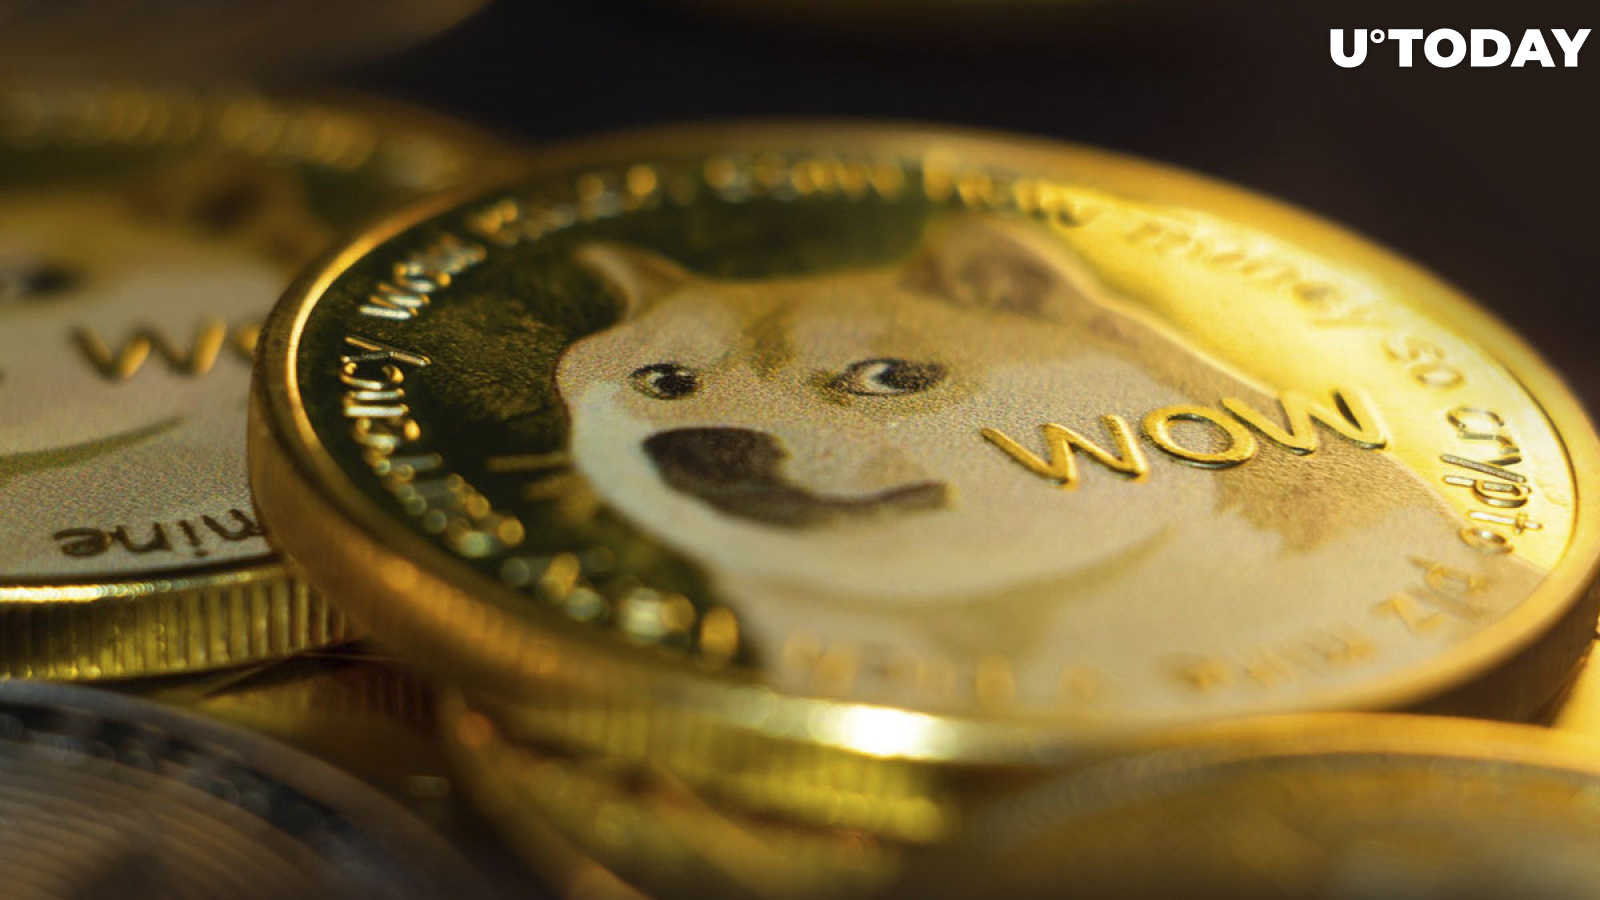 350 Million Dogecoin Purchased as DOGE Price Drops, Offering Chance to Buy Dip